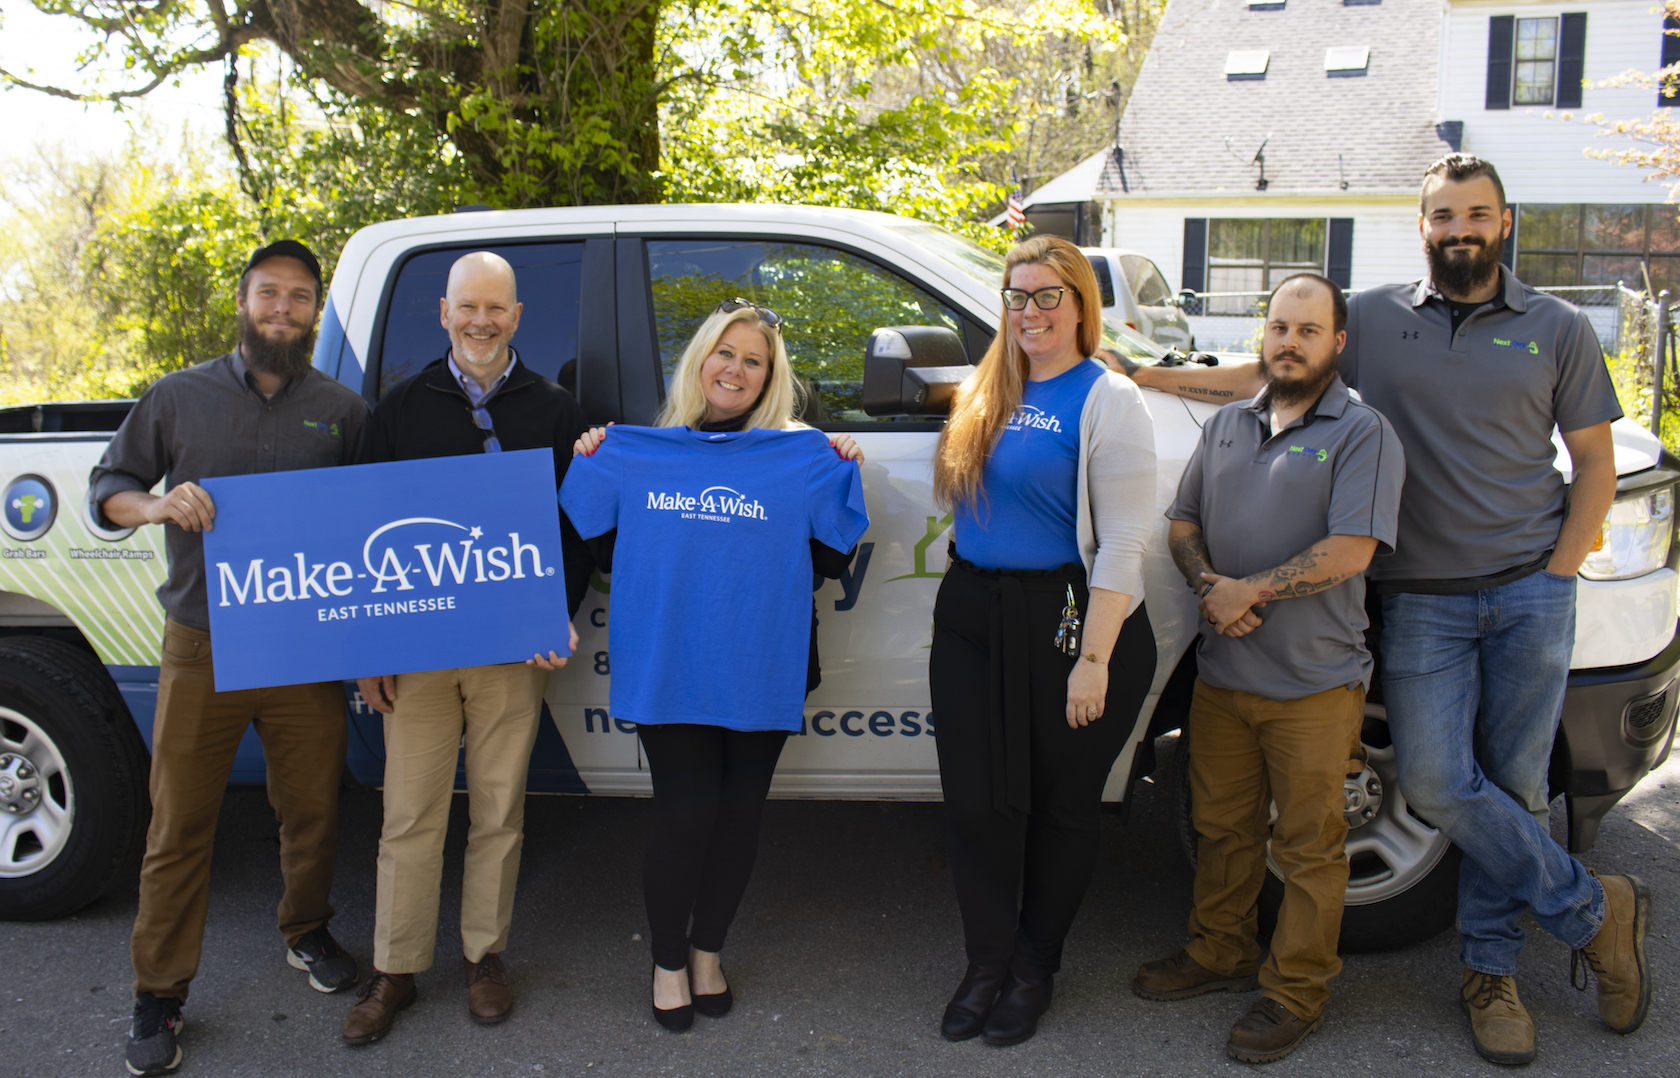 Next Day Access Knoxville & Harmar Mobility Partner to Deliver Make-A-Wish Stairlift 